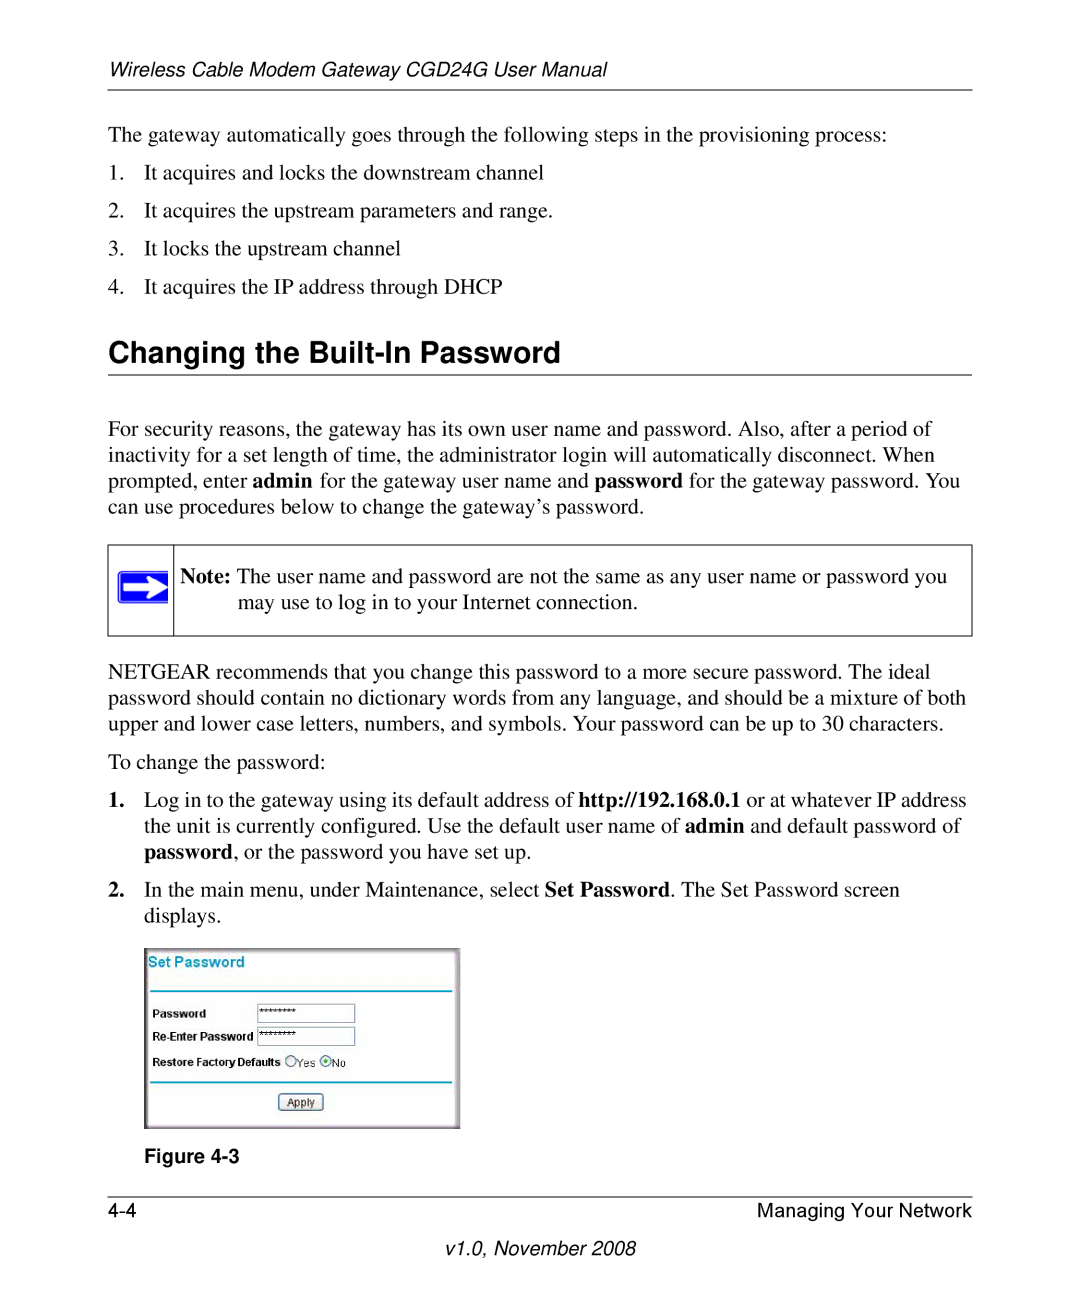 Gateway CGD24G user manual Changing the Built-In Password 